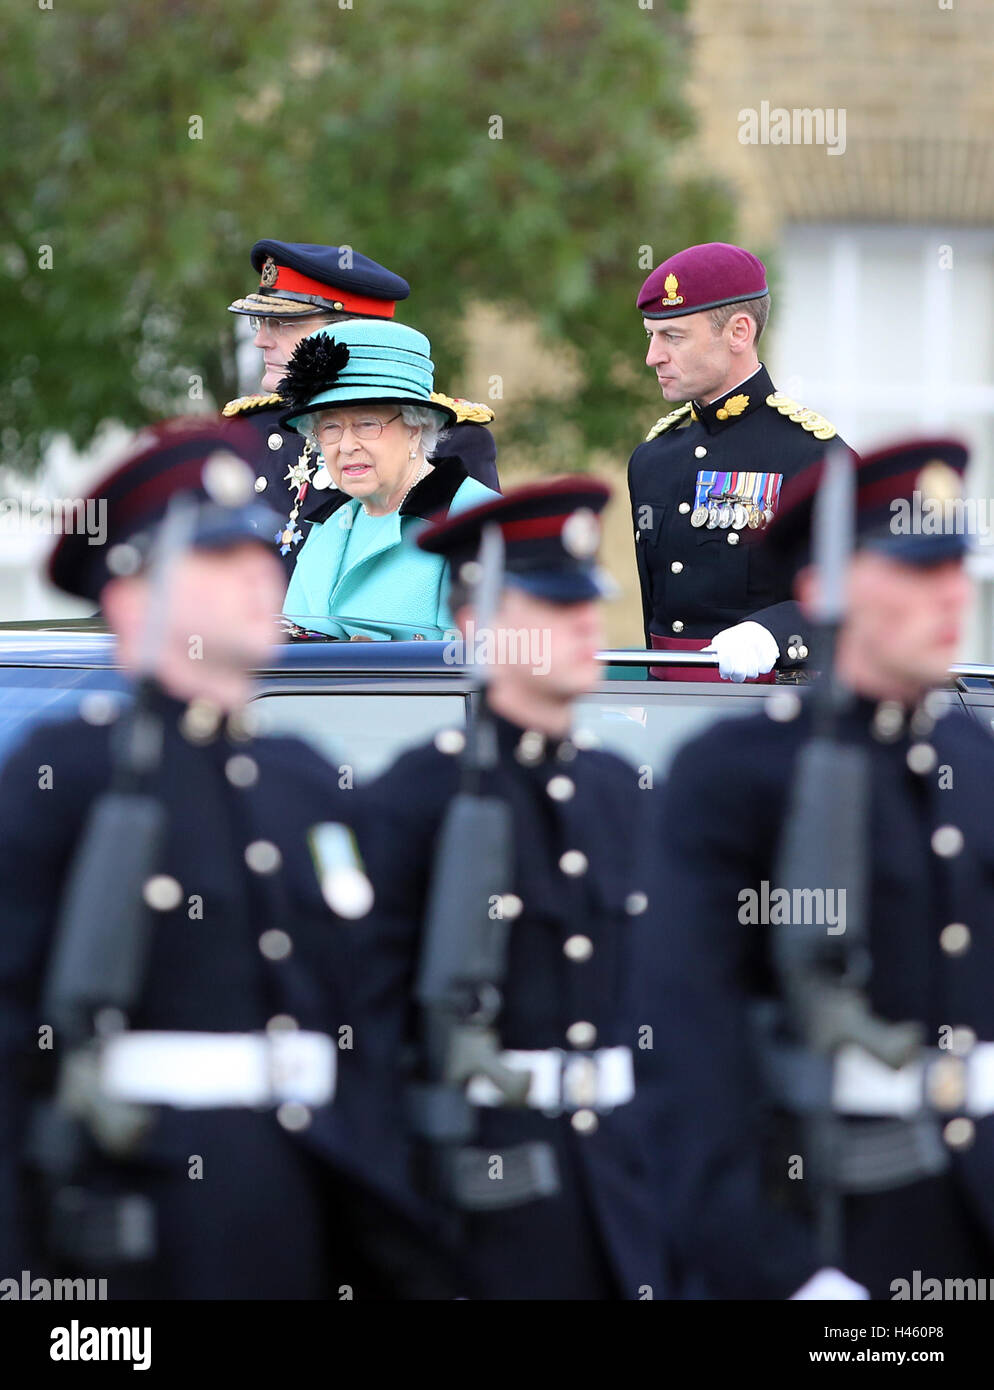 Queen Elizabeth II during a visit to the Corps of Royal Engineers at Brompton Barracks in Chatham, Kent, to celebrate their 300th anniversary. Stock Photo